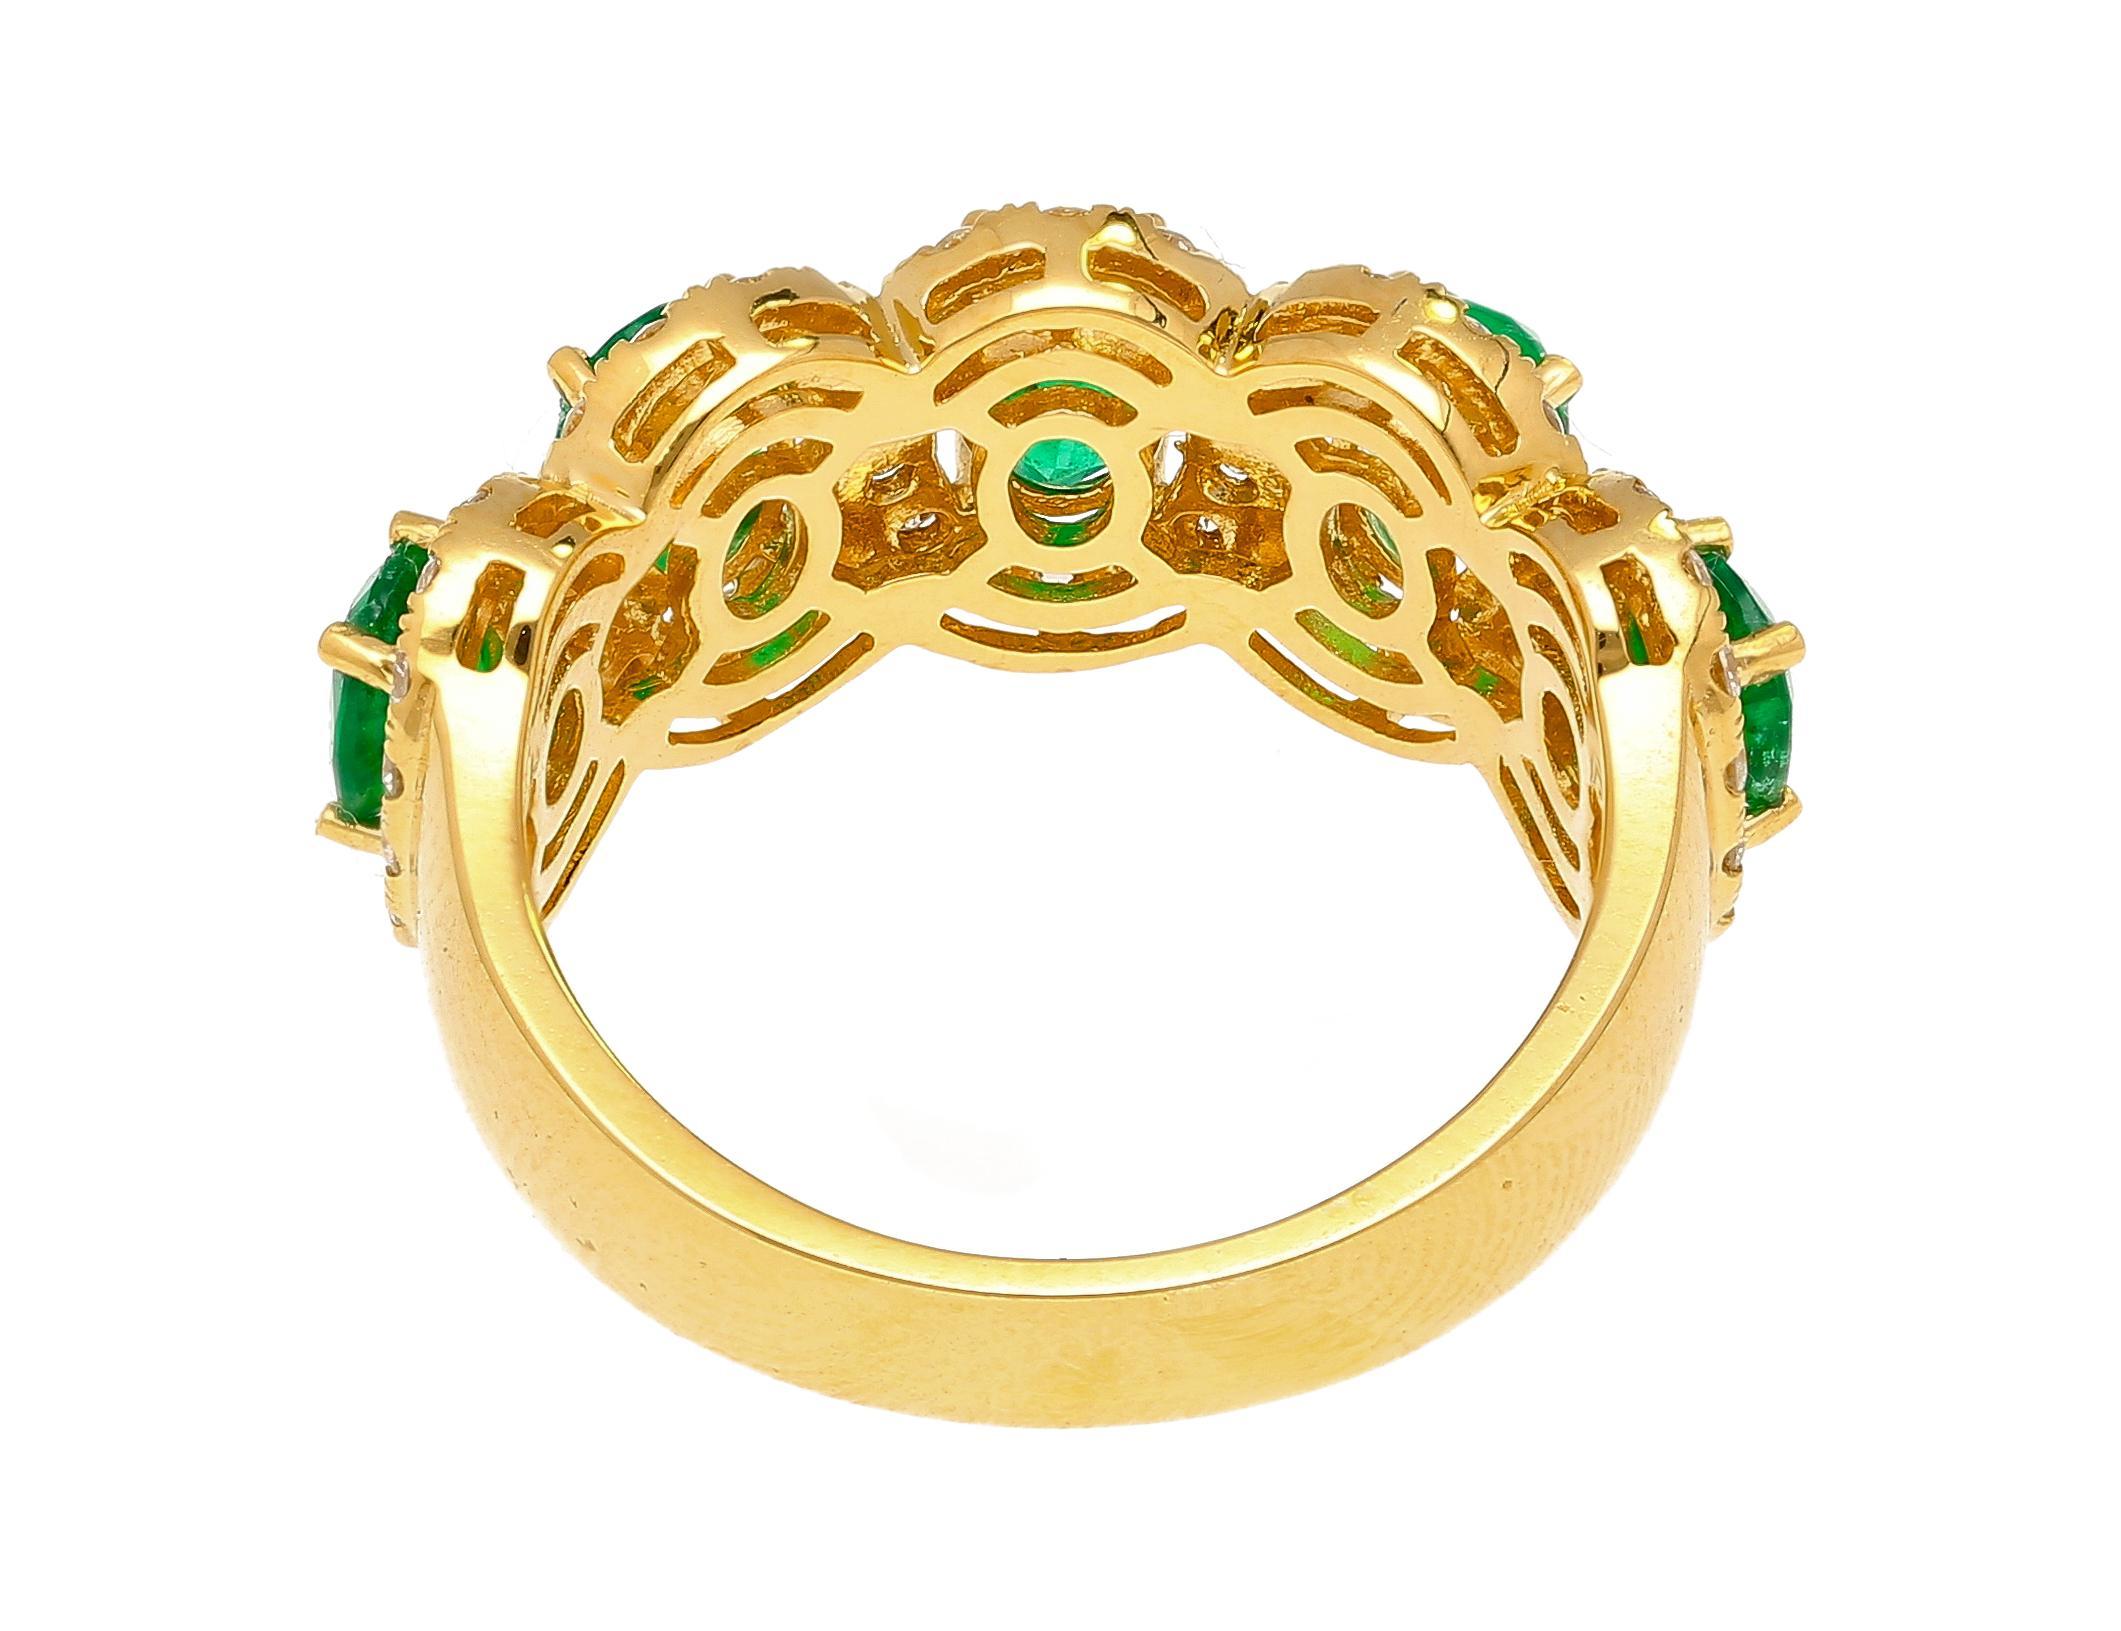 Natural Emerald and Diamond Wedding Band in 18k Solid Yellow Gold.

This wedding band contains 5 emerald stones. Each stone is oval-cut and they carry a total weight of 1.70 carats. Each emerald is adorned with a round cut white diamond halo,